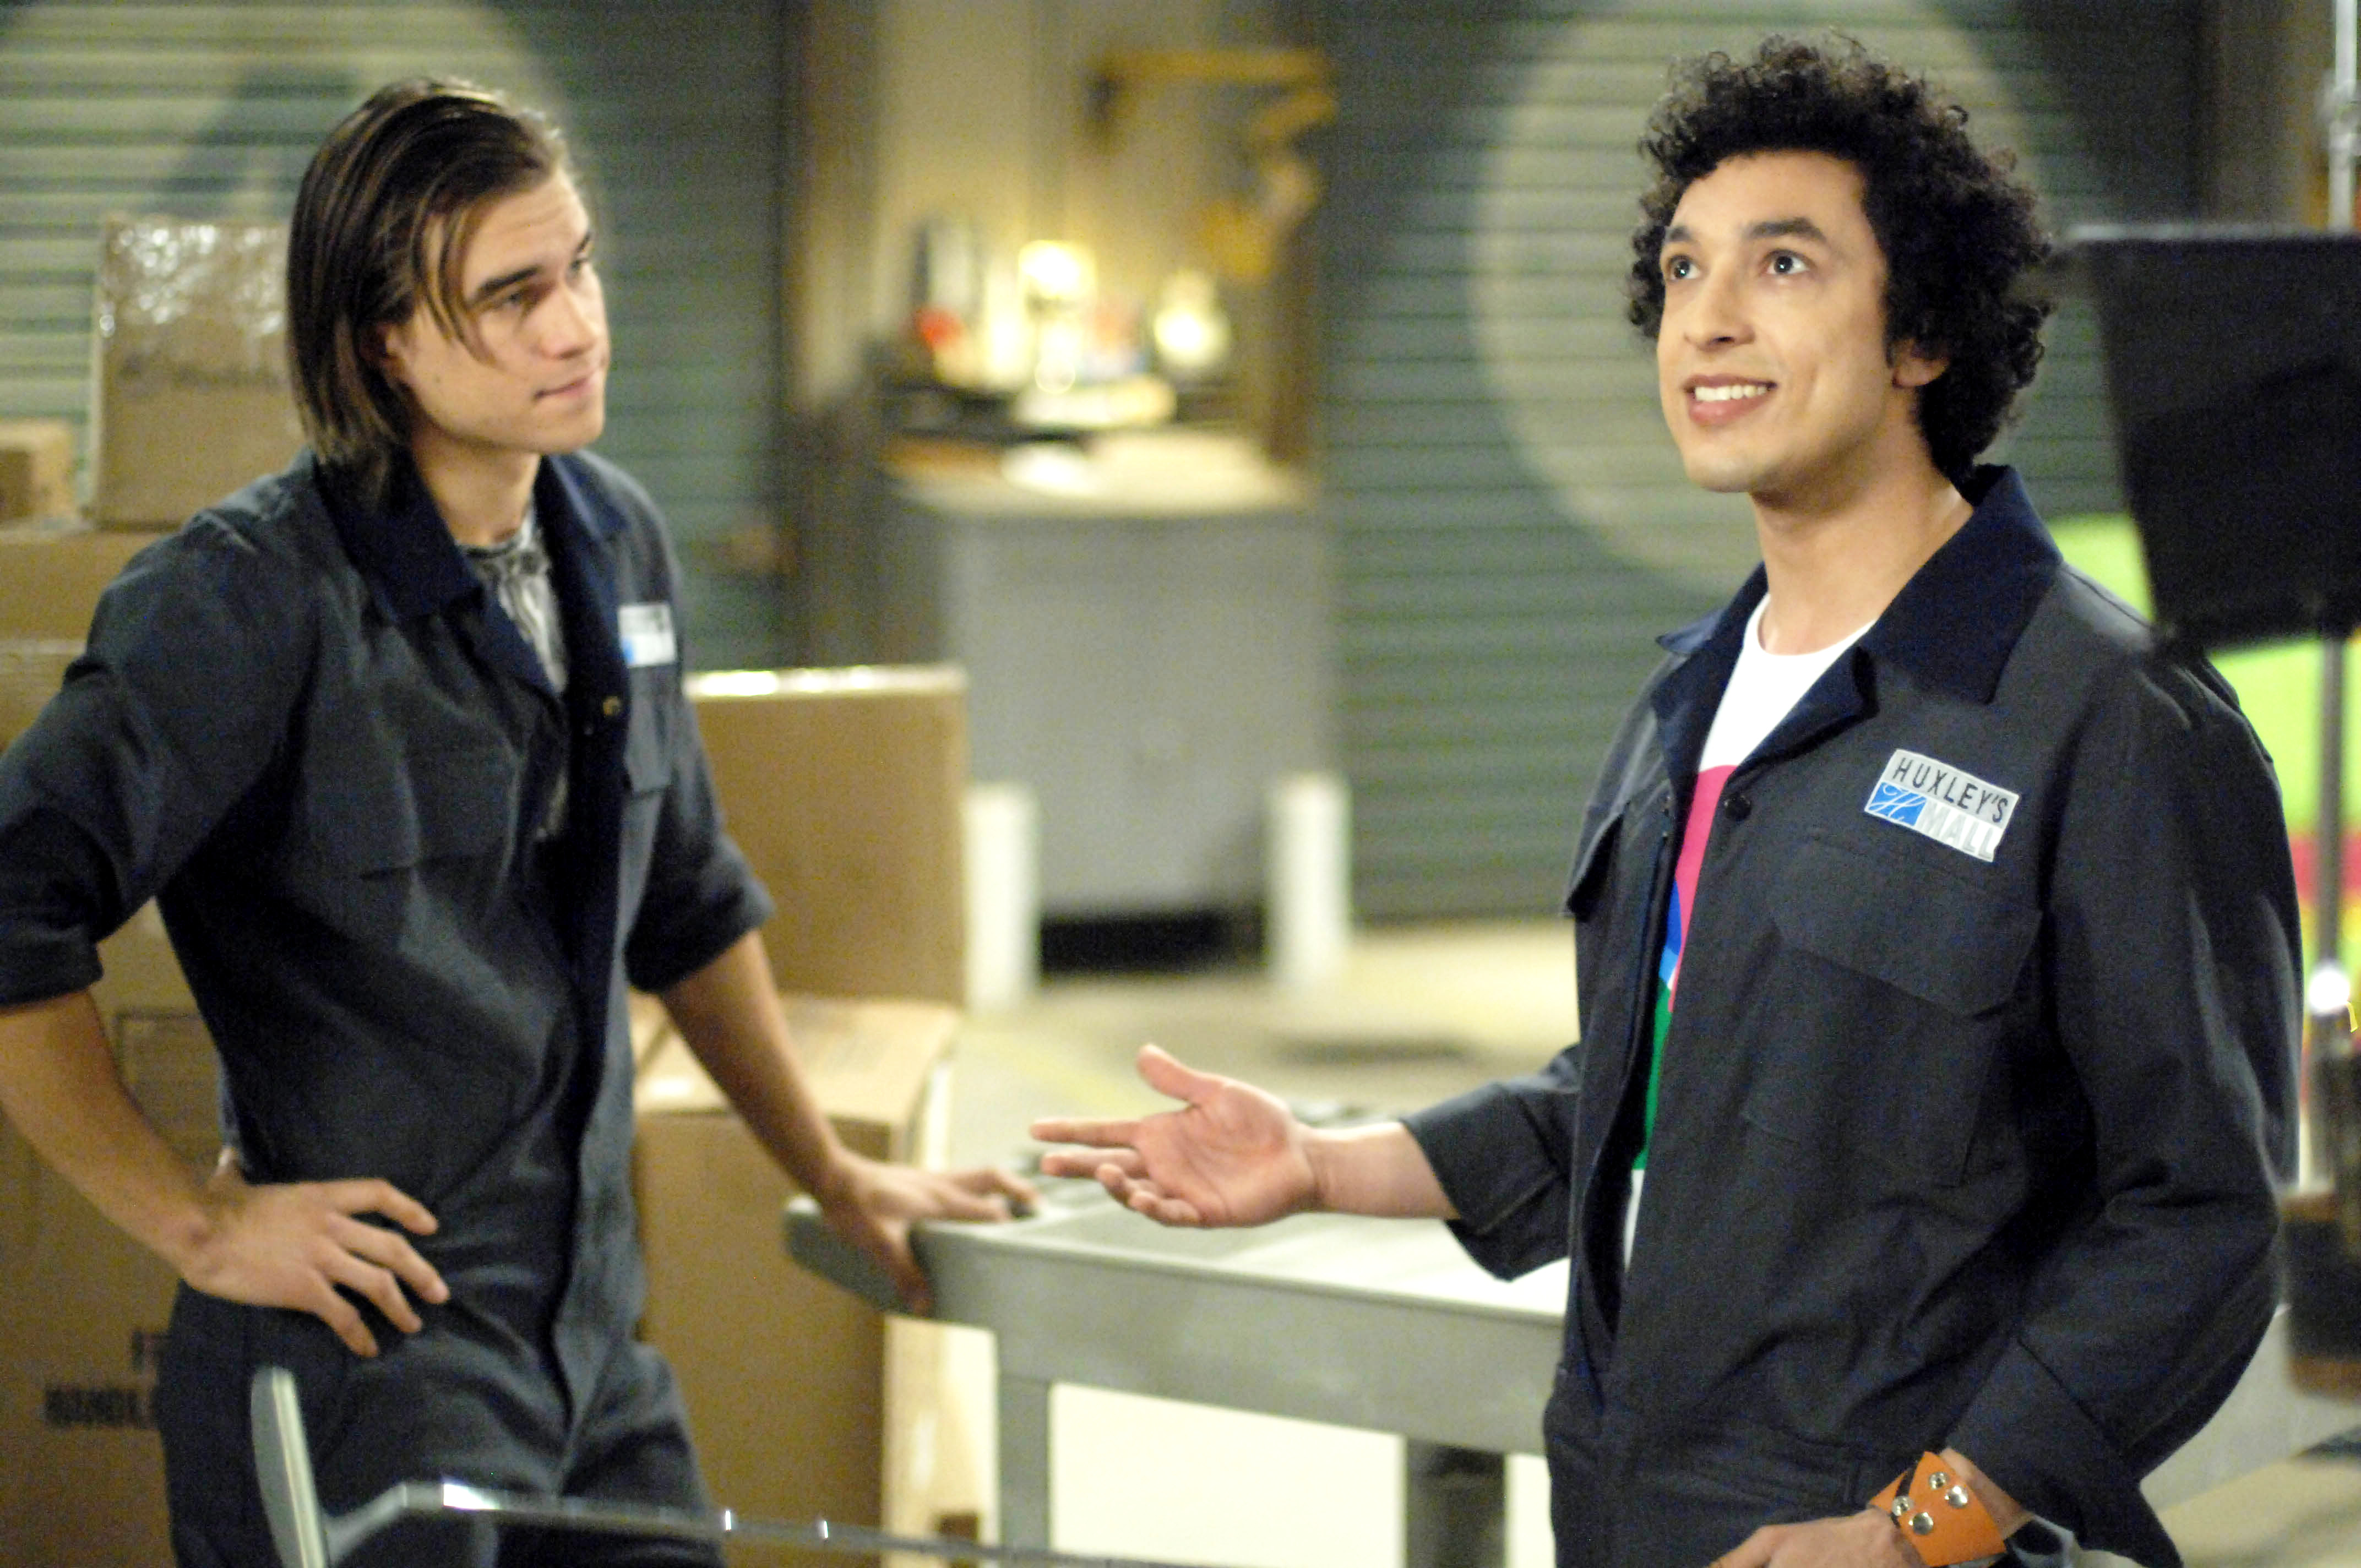 Joey (Rob Mayes) and Ricky (Wade Allain-Marcus) talk in warehouse in The American Mall (2008)